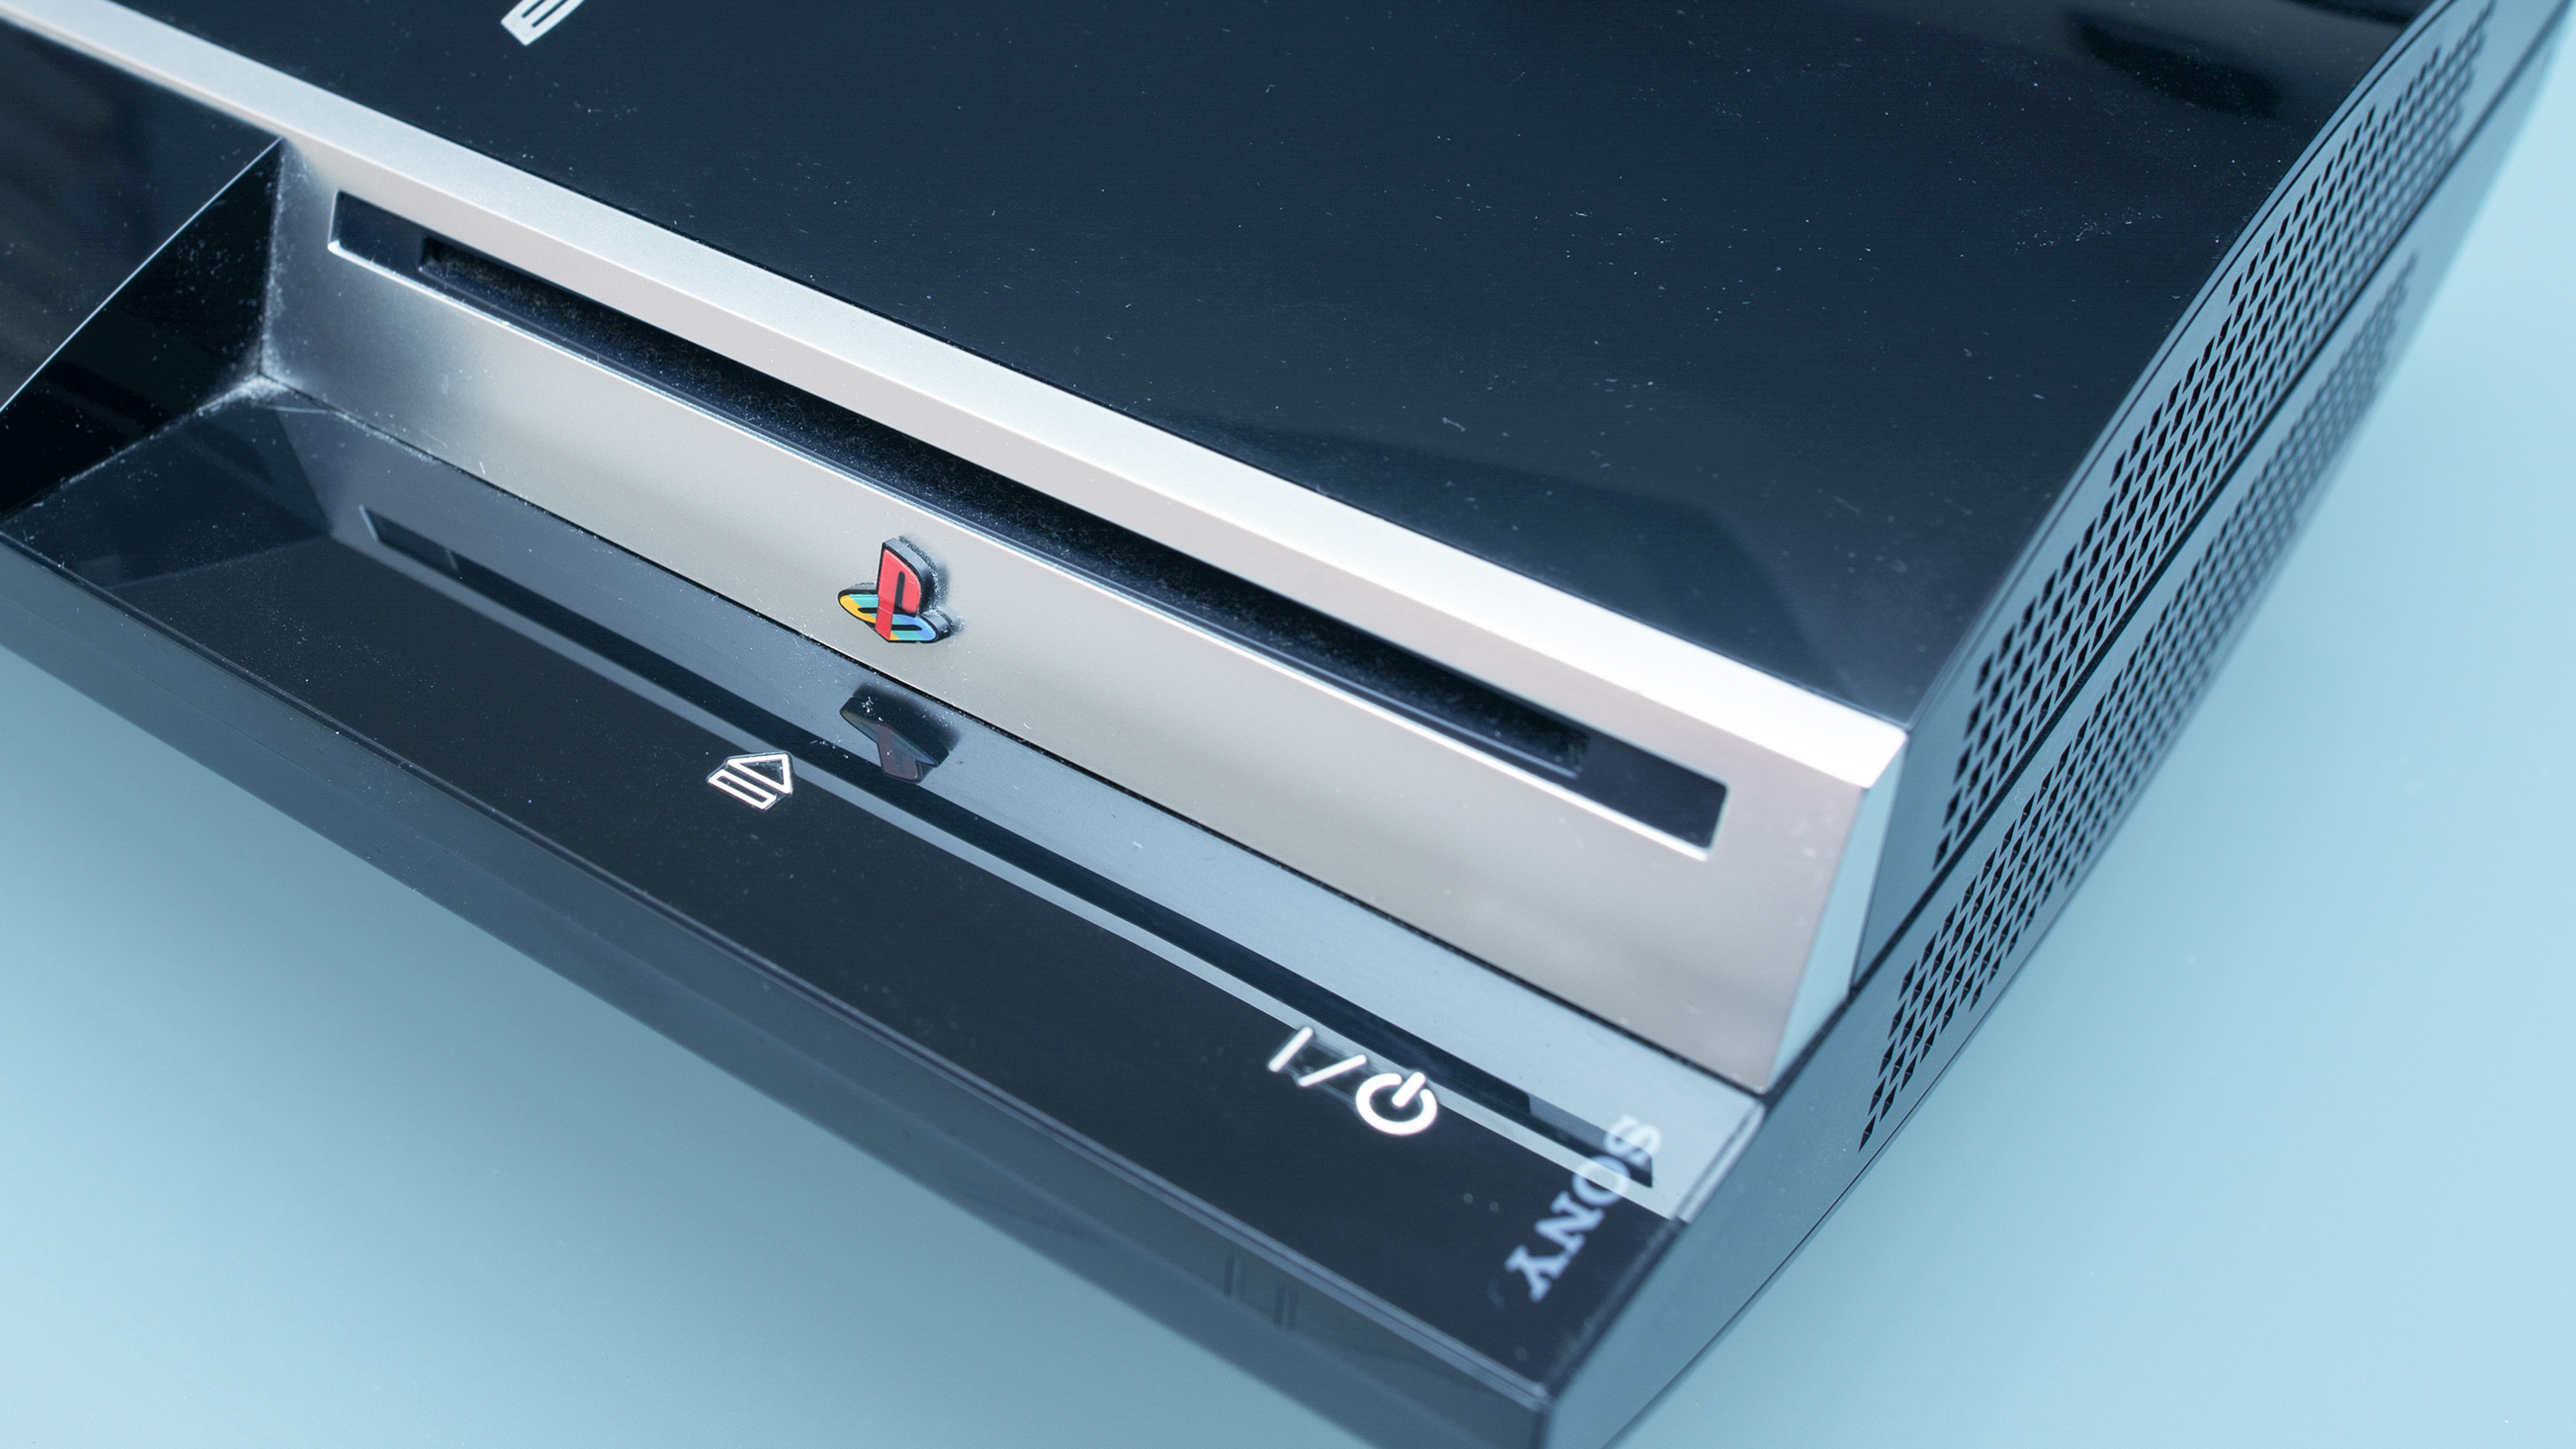 PlayStation Store will reportedly stop selling PS3, PSP and Vita